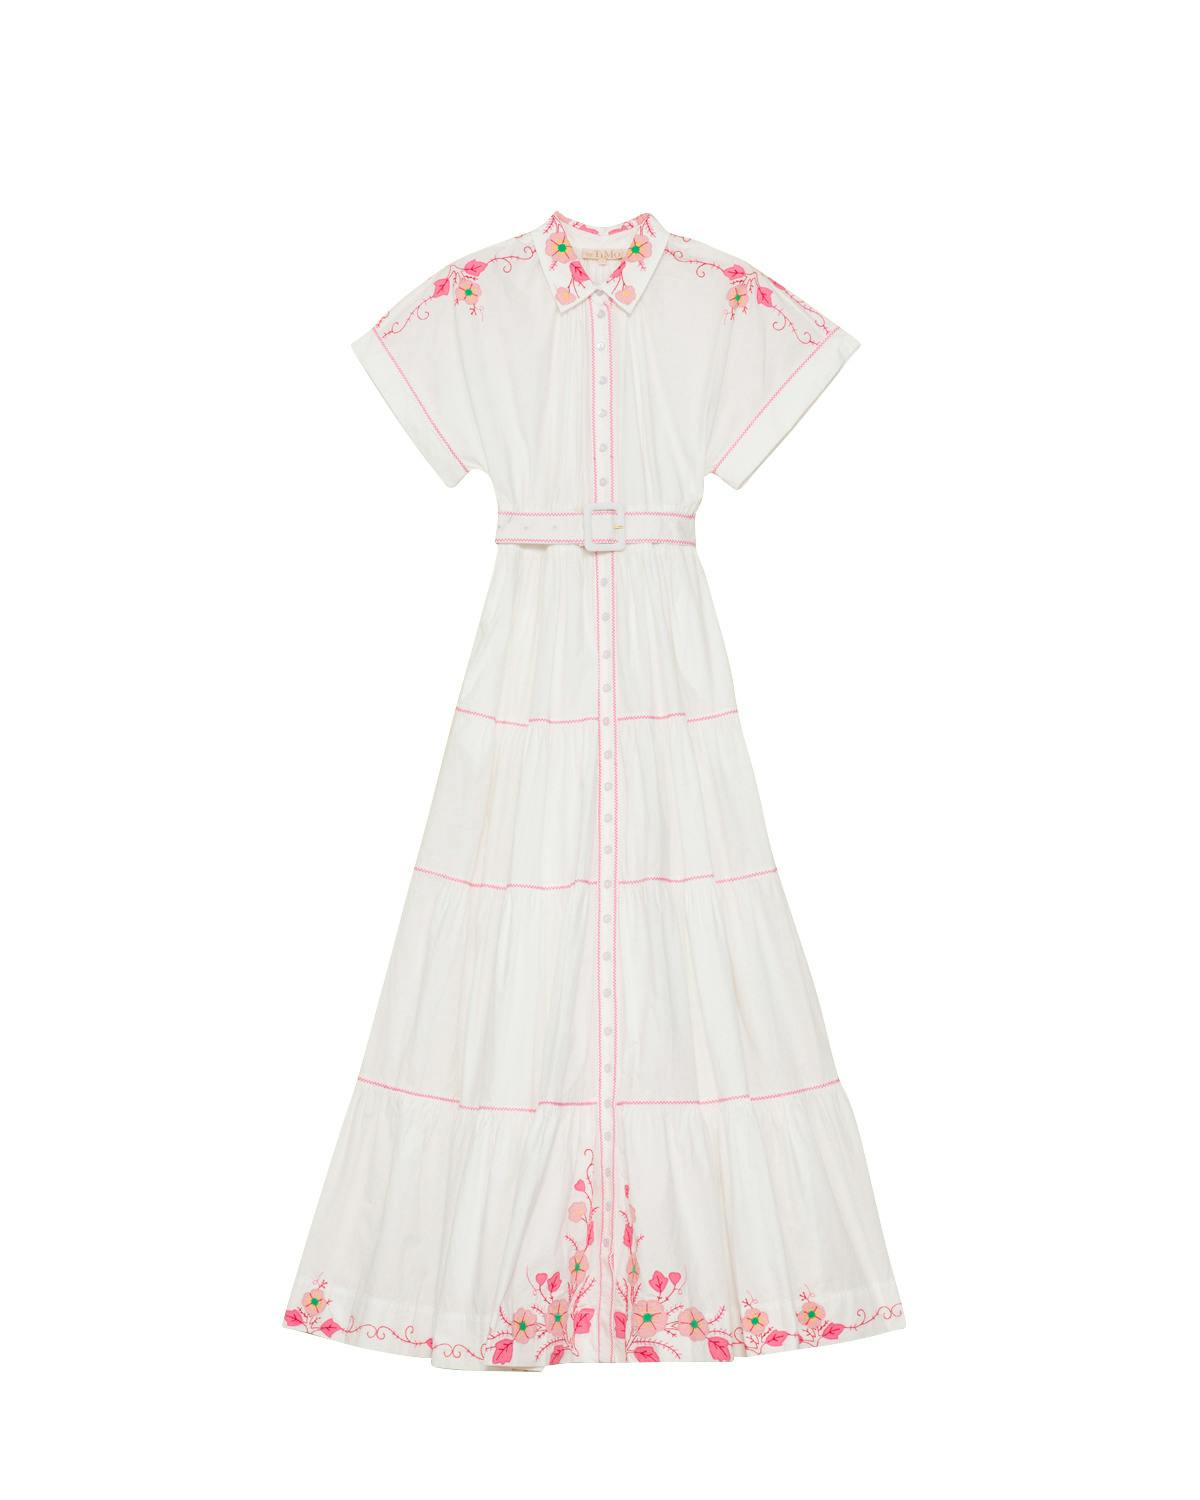 Poplin Embroidered Shirt Dress, White With Embroidery. Image #7